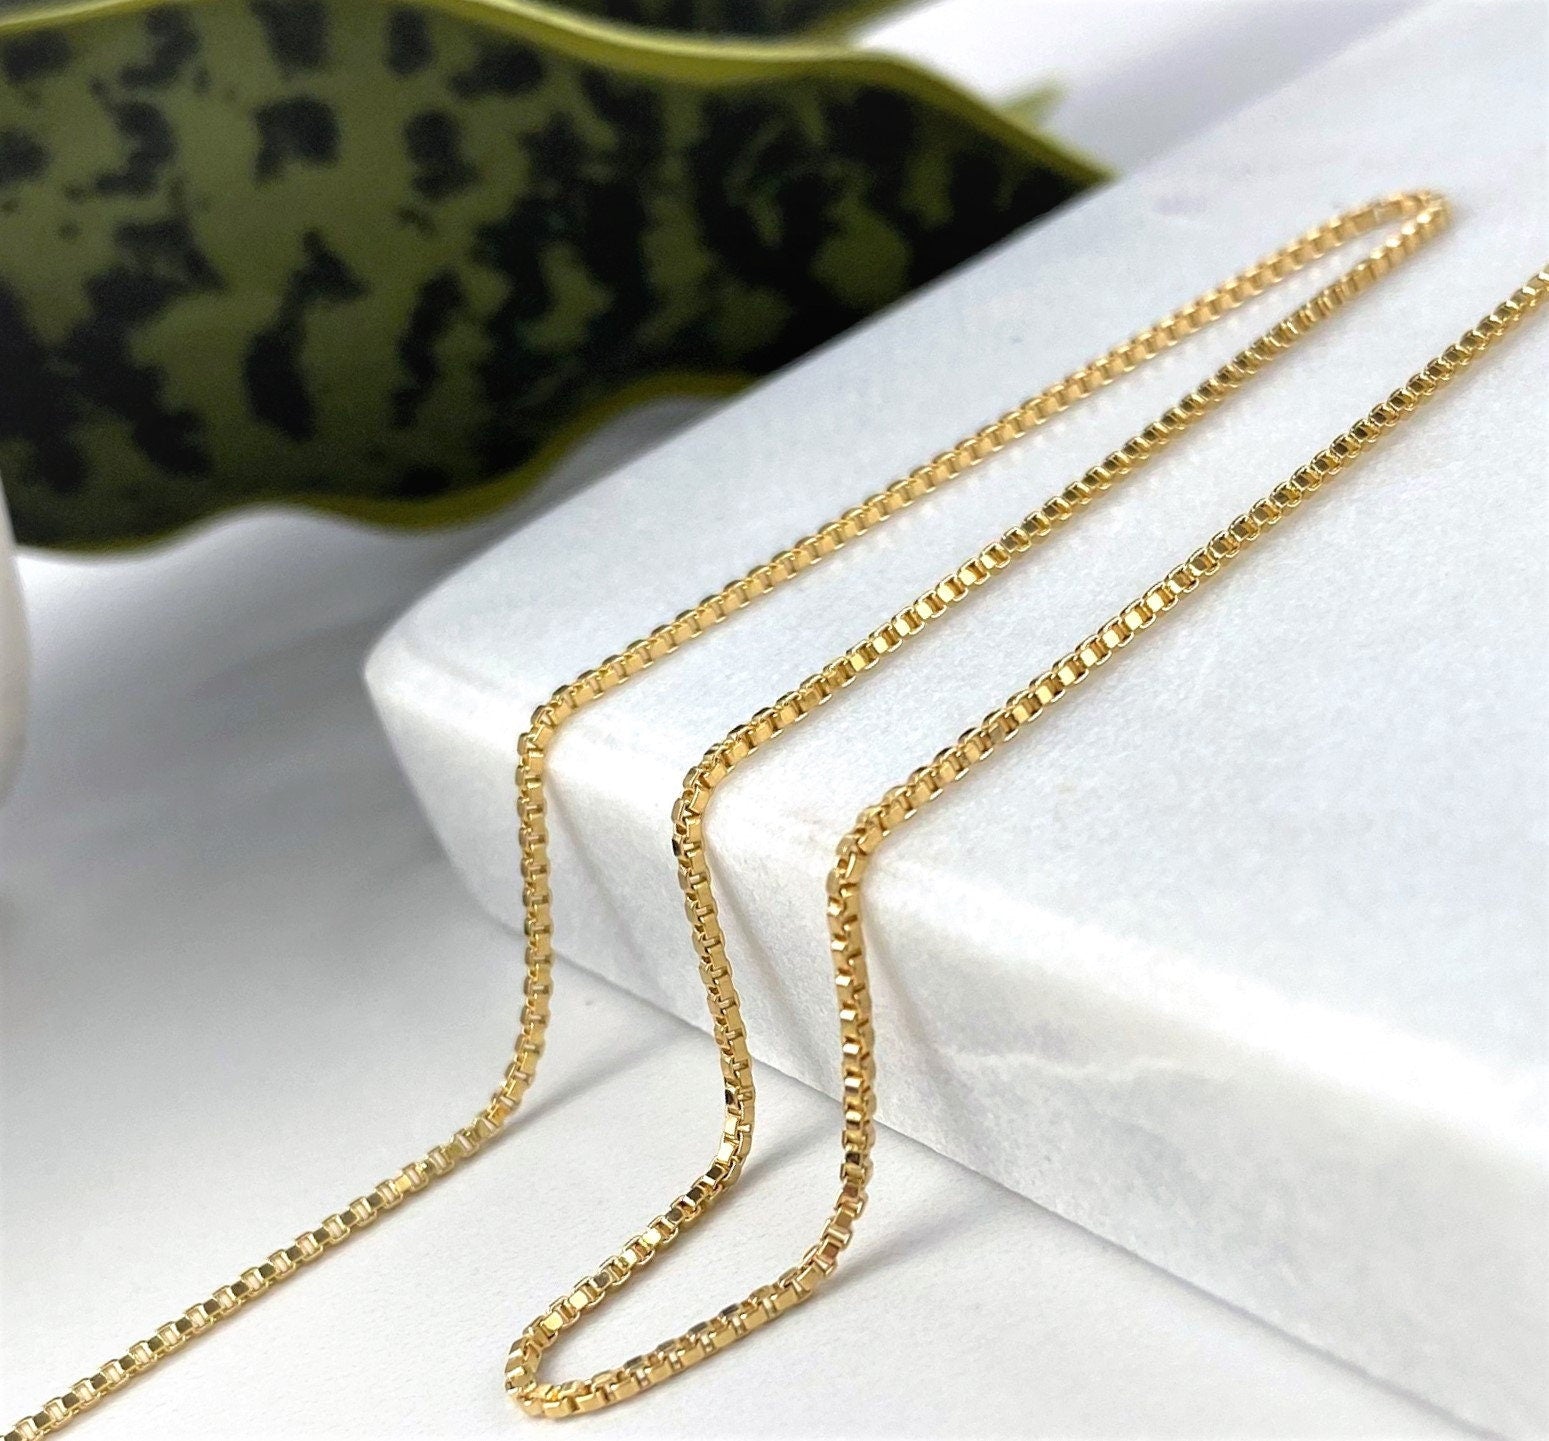 18k Gold Filled Fancy Box Chain 1mm, You May Add Extender Perfecting Your Size Wholesale Jewelry Making Supplies - Creative Styling Design